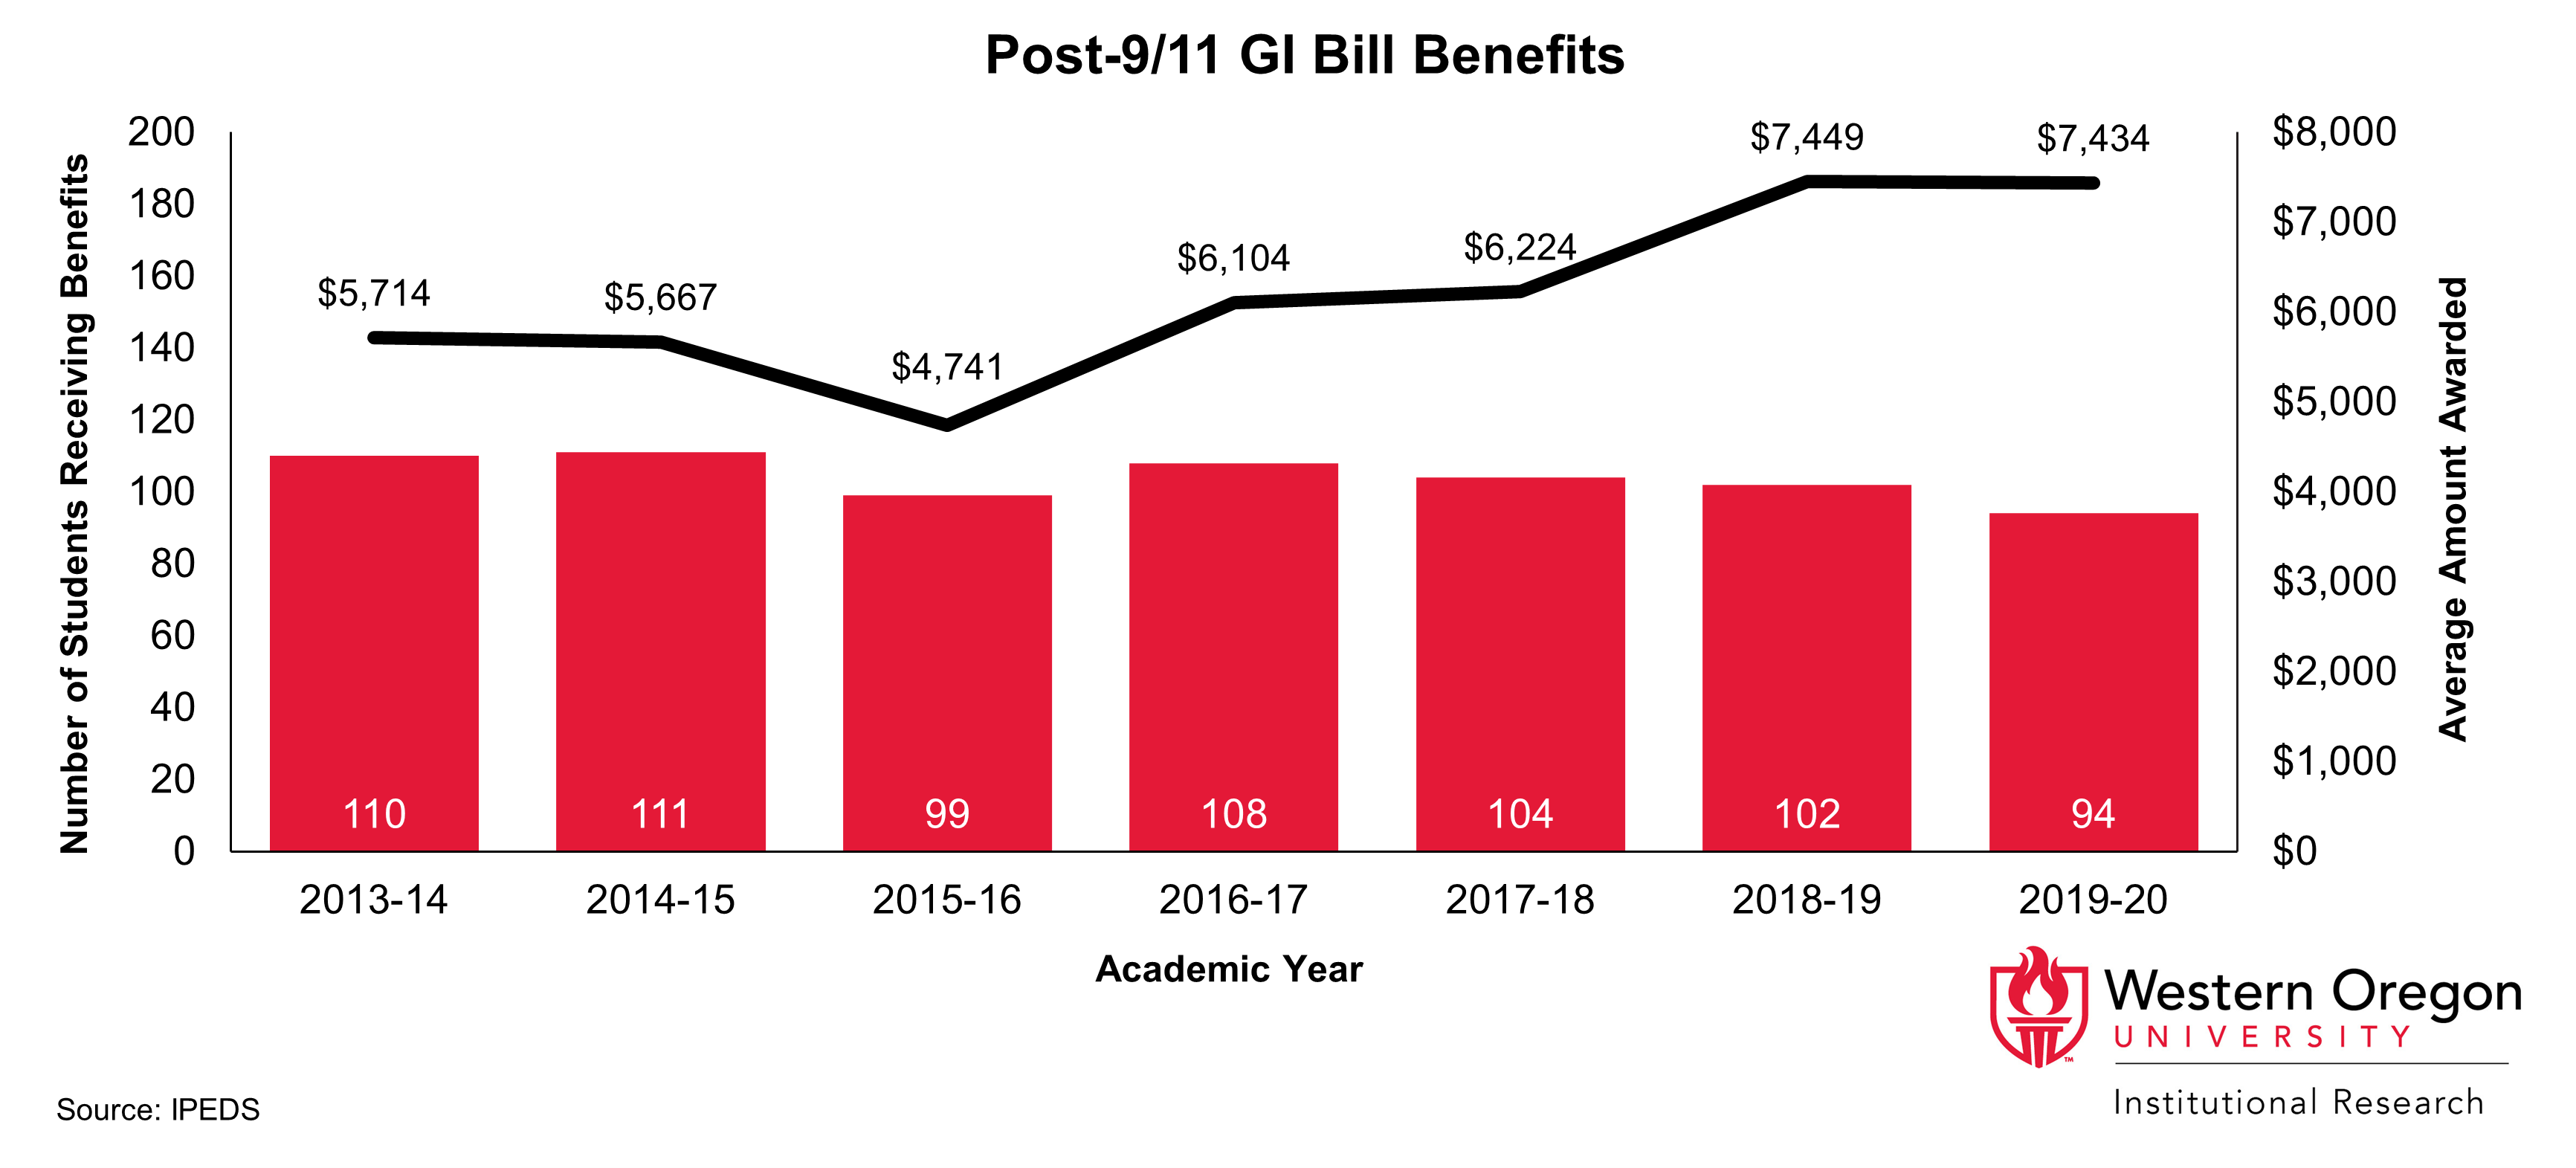 Bar and line graph of the number of students recieving post-9/11 GI Bill Benefits and the average amount awarded from 2013 to 2020, showing that the number of students has remained relatively steady while the average amount awarded has increased since 2016.